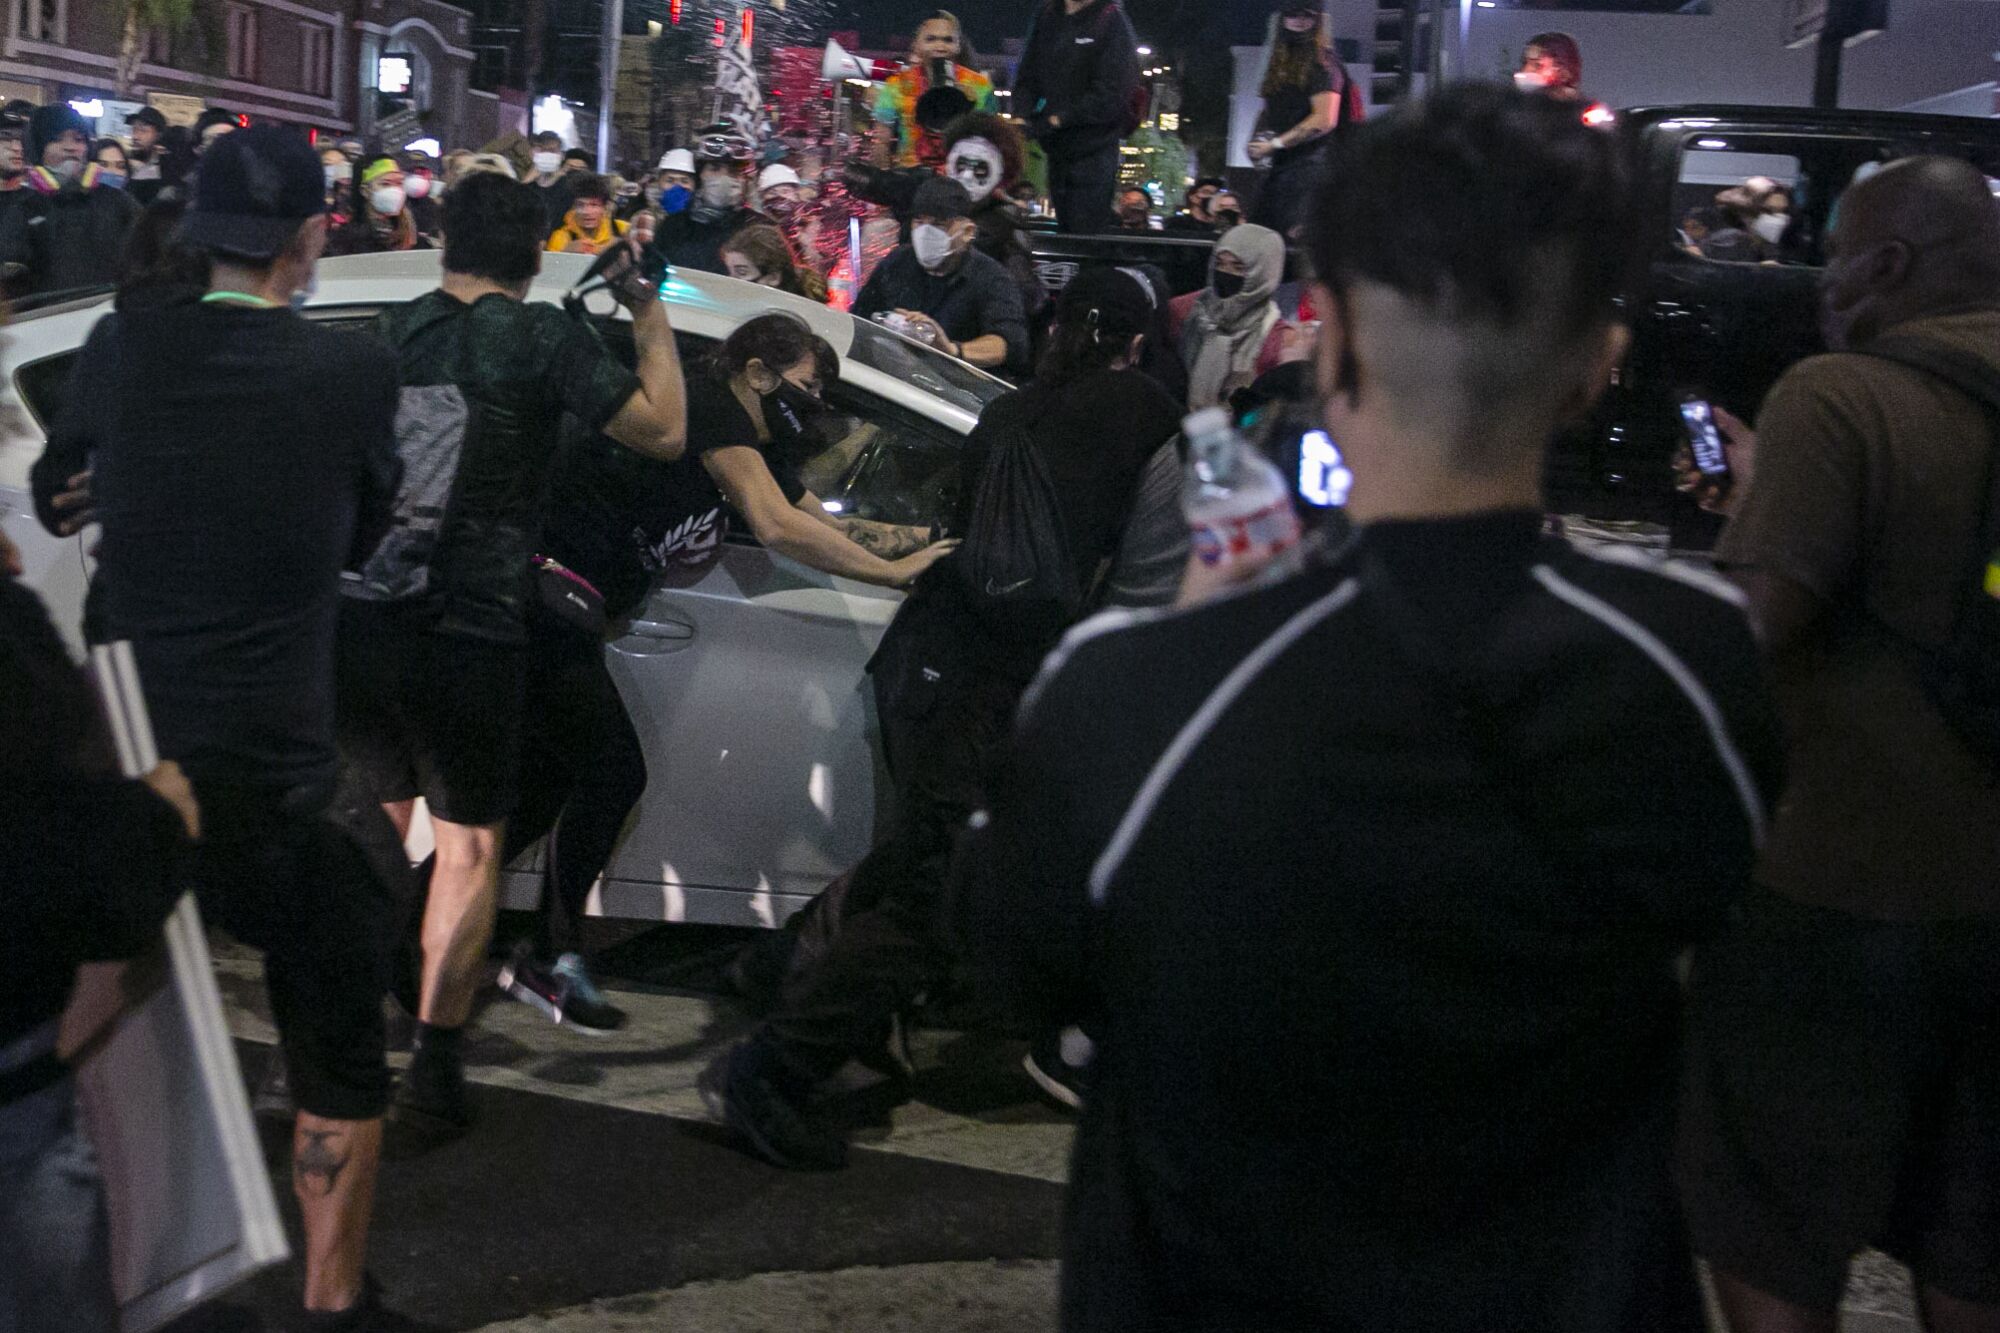 A Prius runs through a crowd of people on Sunset Boulevard and North Cahuenga Boulevard during a protest Thursday.